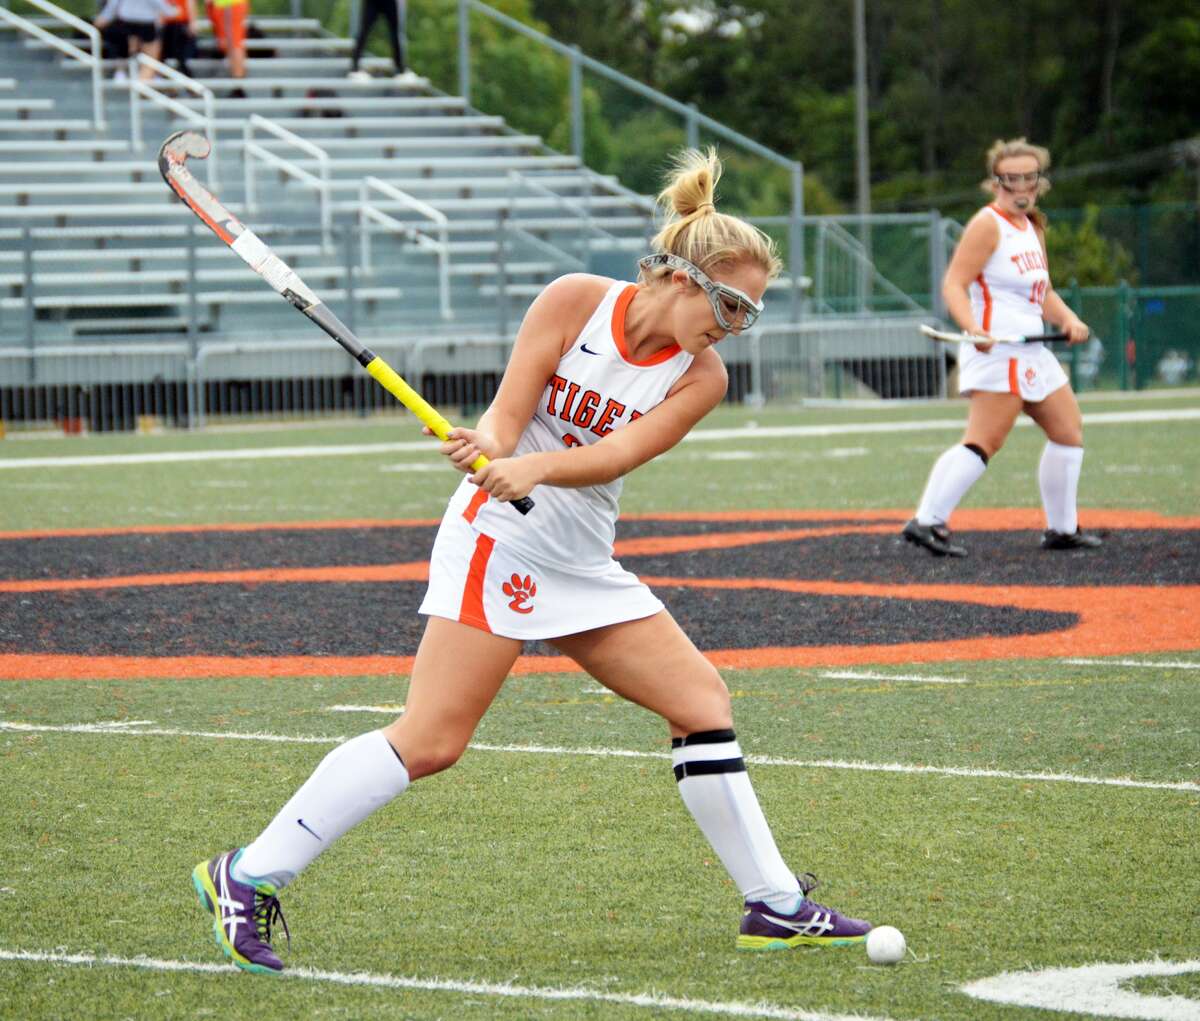 Edwardsville senior Allie Hosto fires a ball down the field during Wednesday’s first half game against Nerinx Hall at the District 7 Sports Complex.